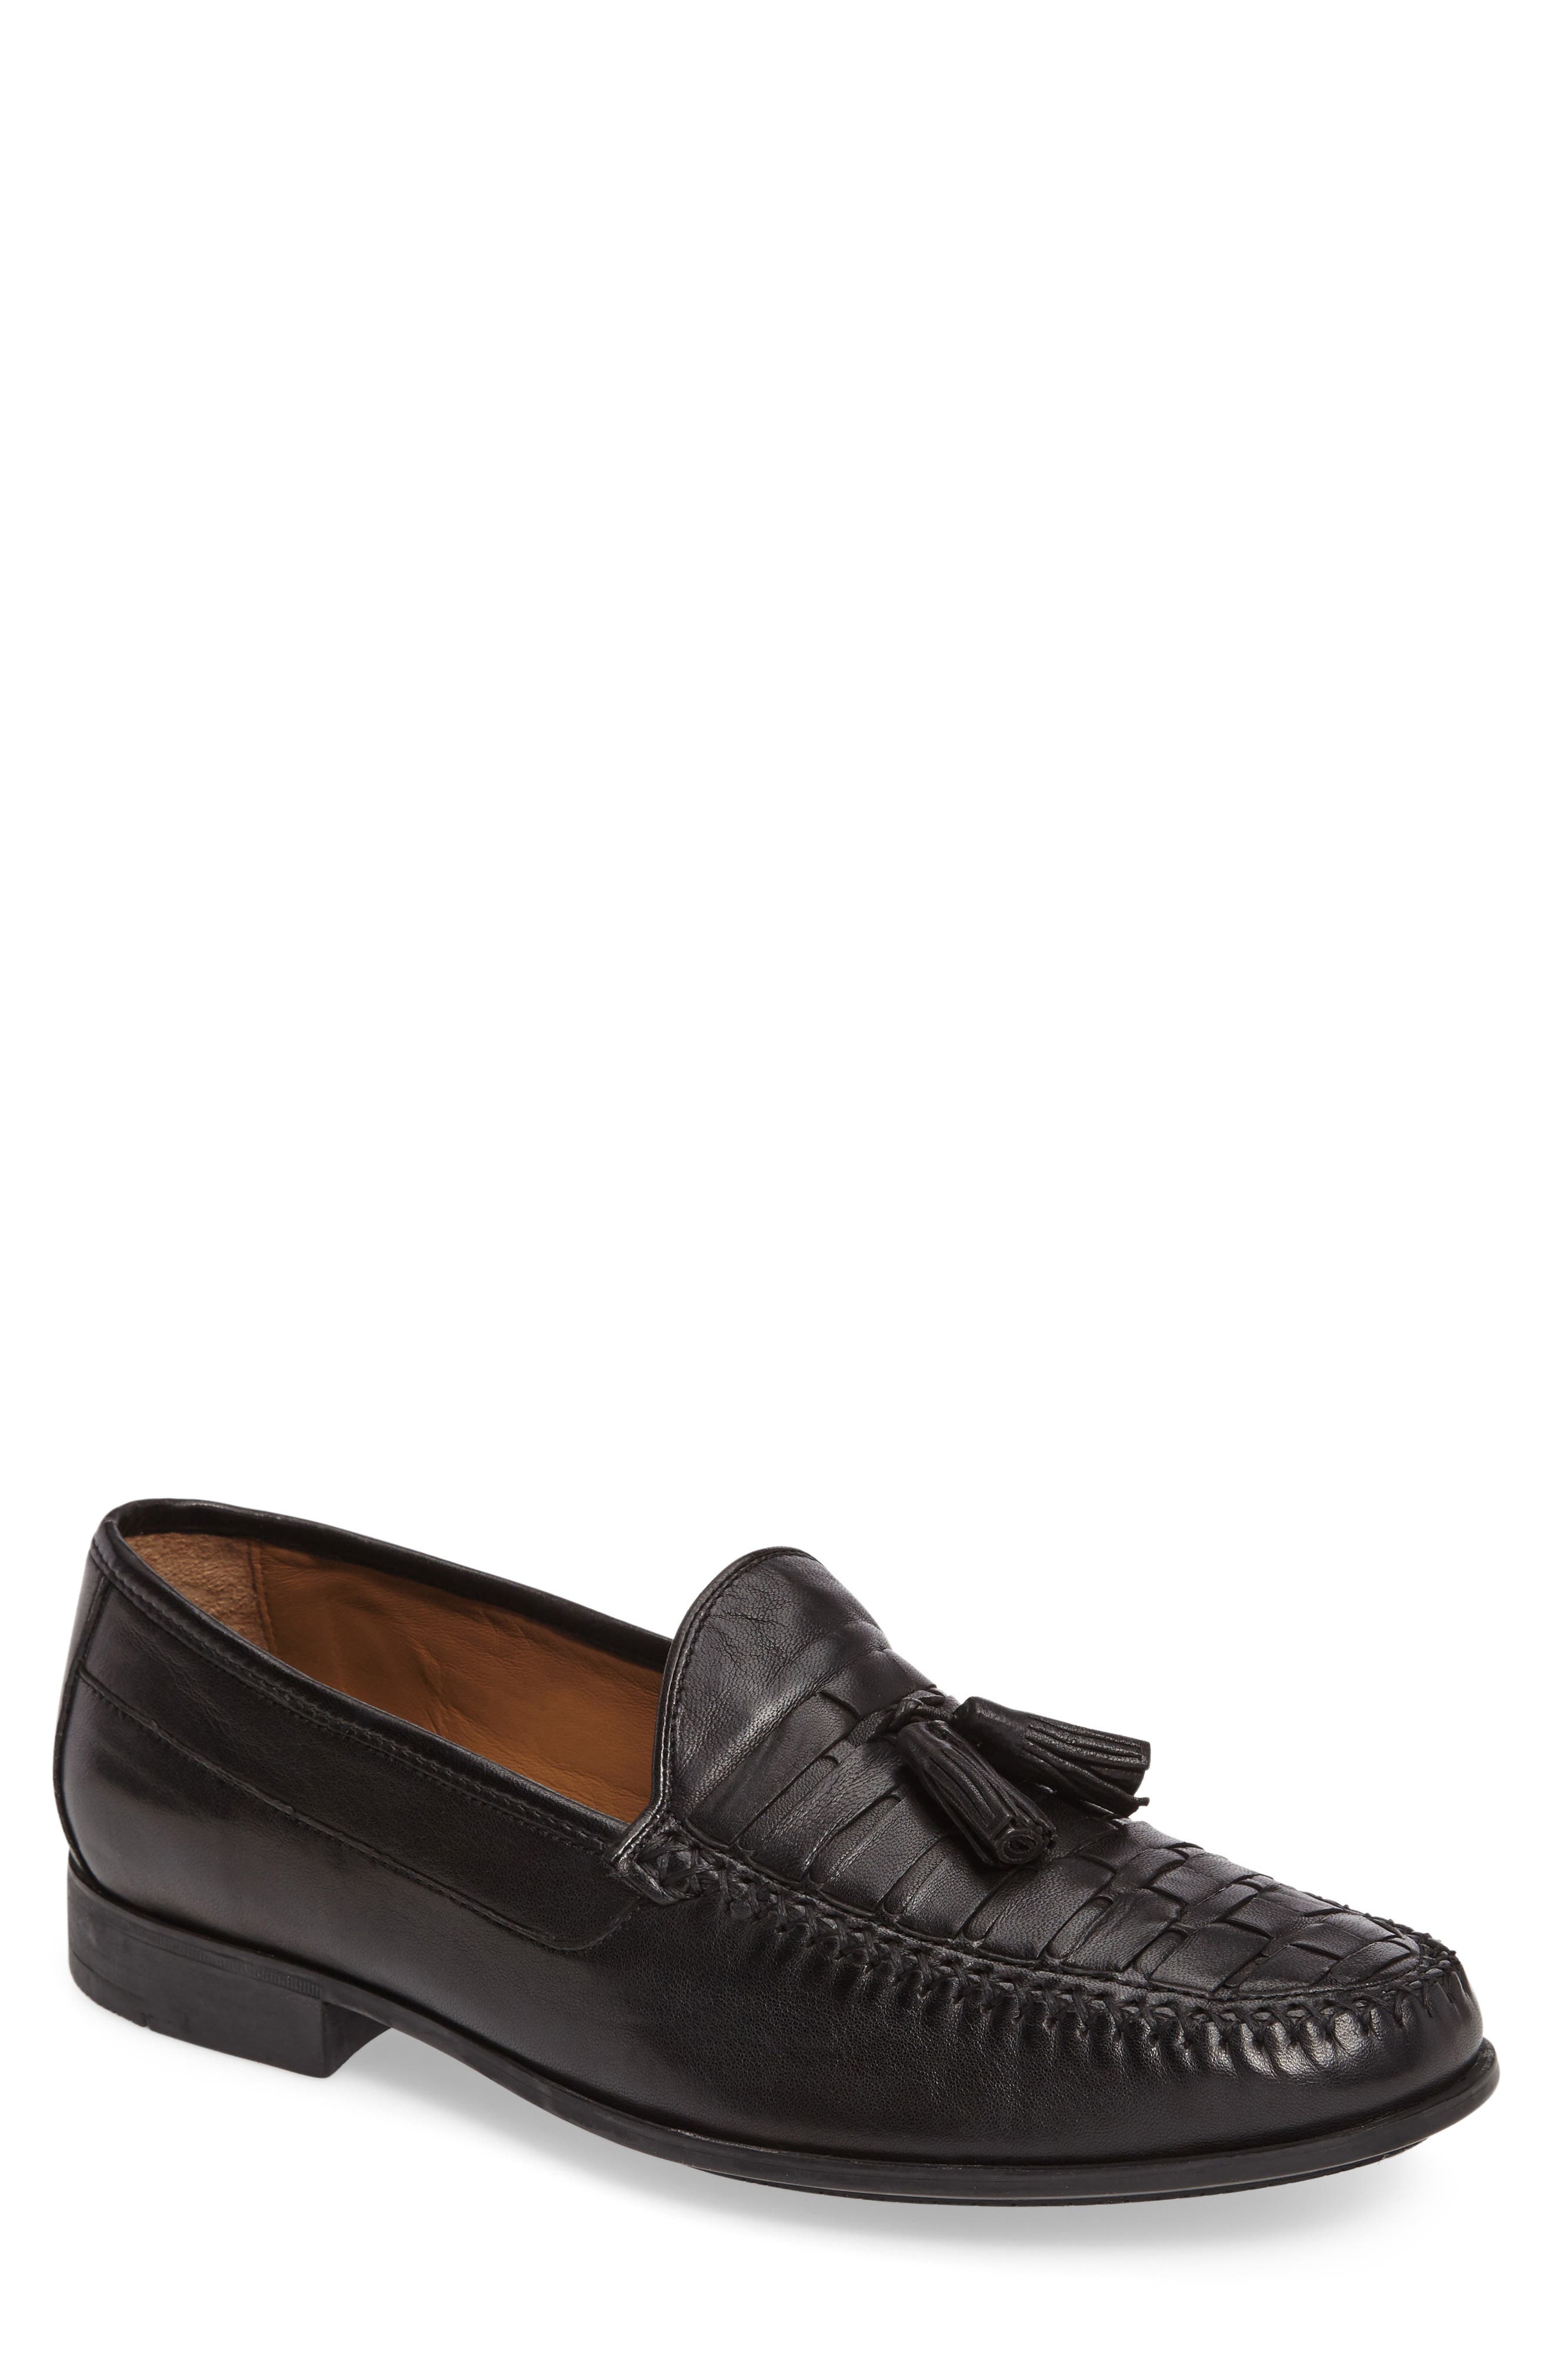 johnston and murphy woven loafer